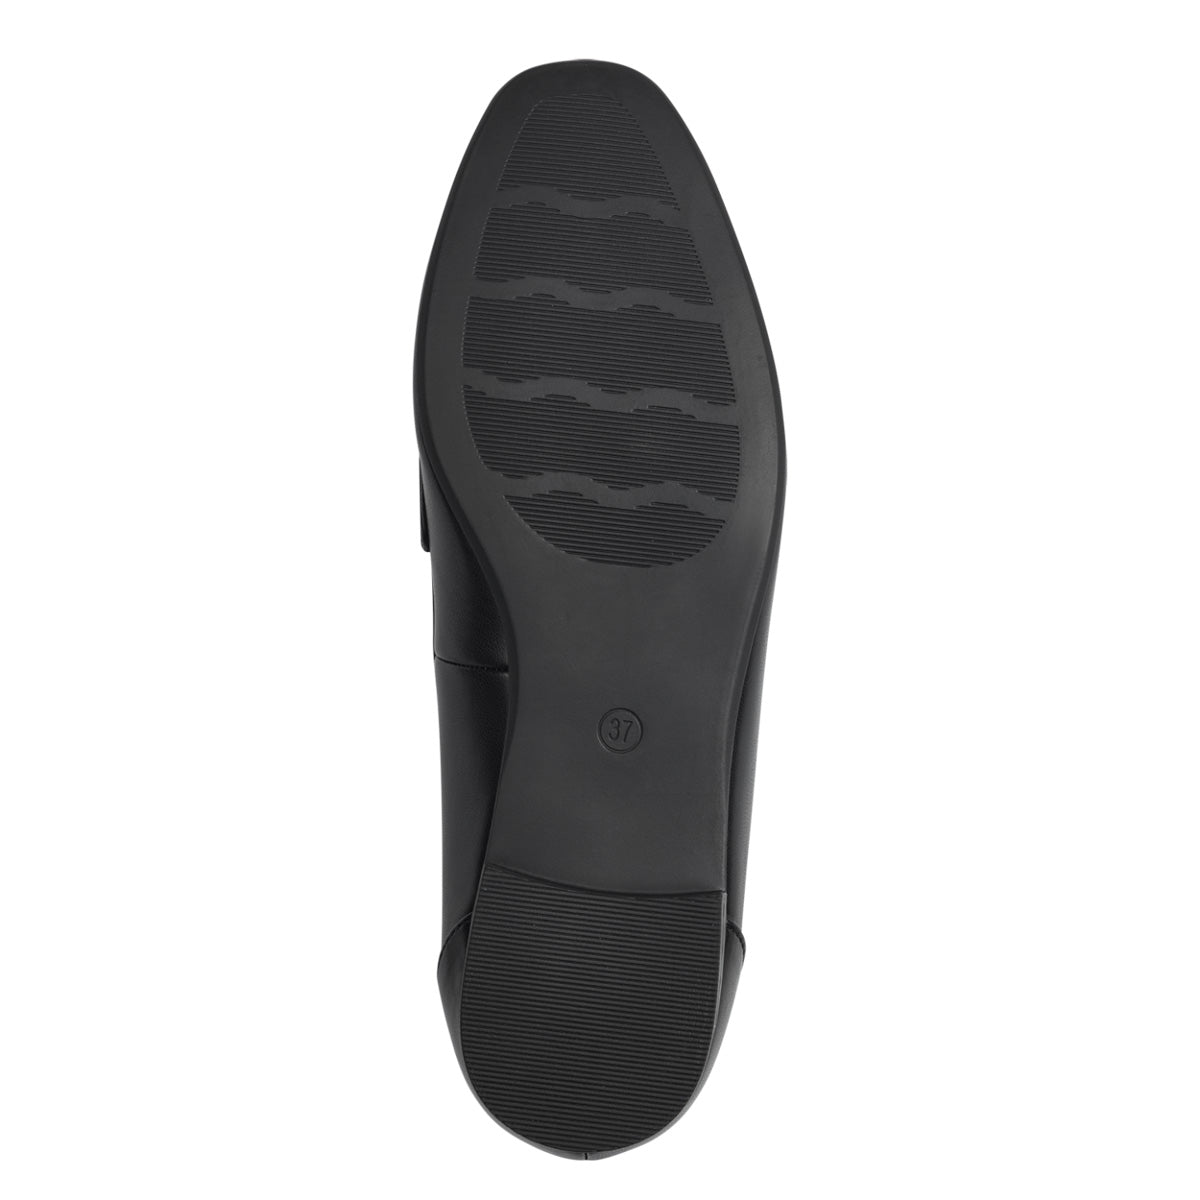 Bottom view of the all-black sole.